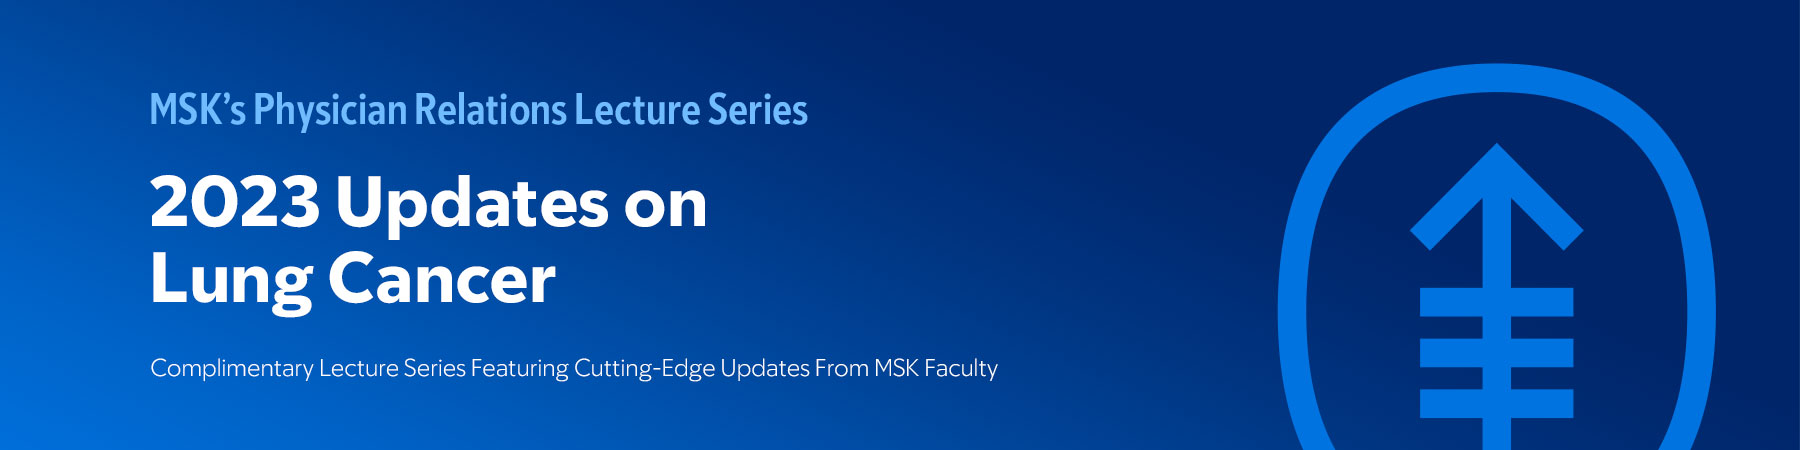 MSK's Physician Relations Lecture Series: 2023 Updates on Lung Cancer - On Demand Banner